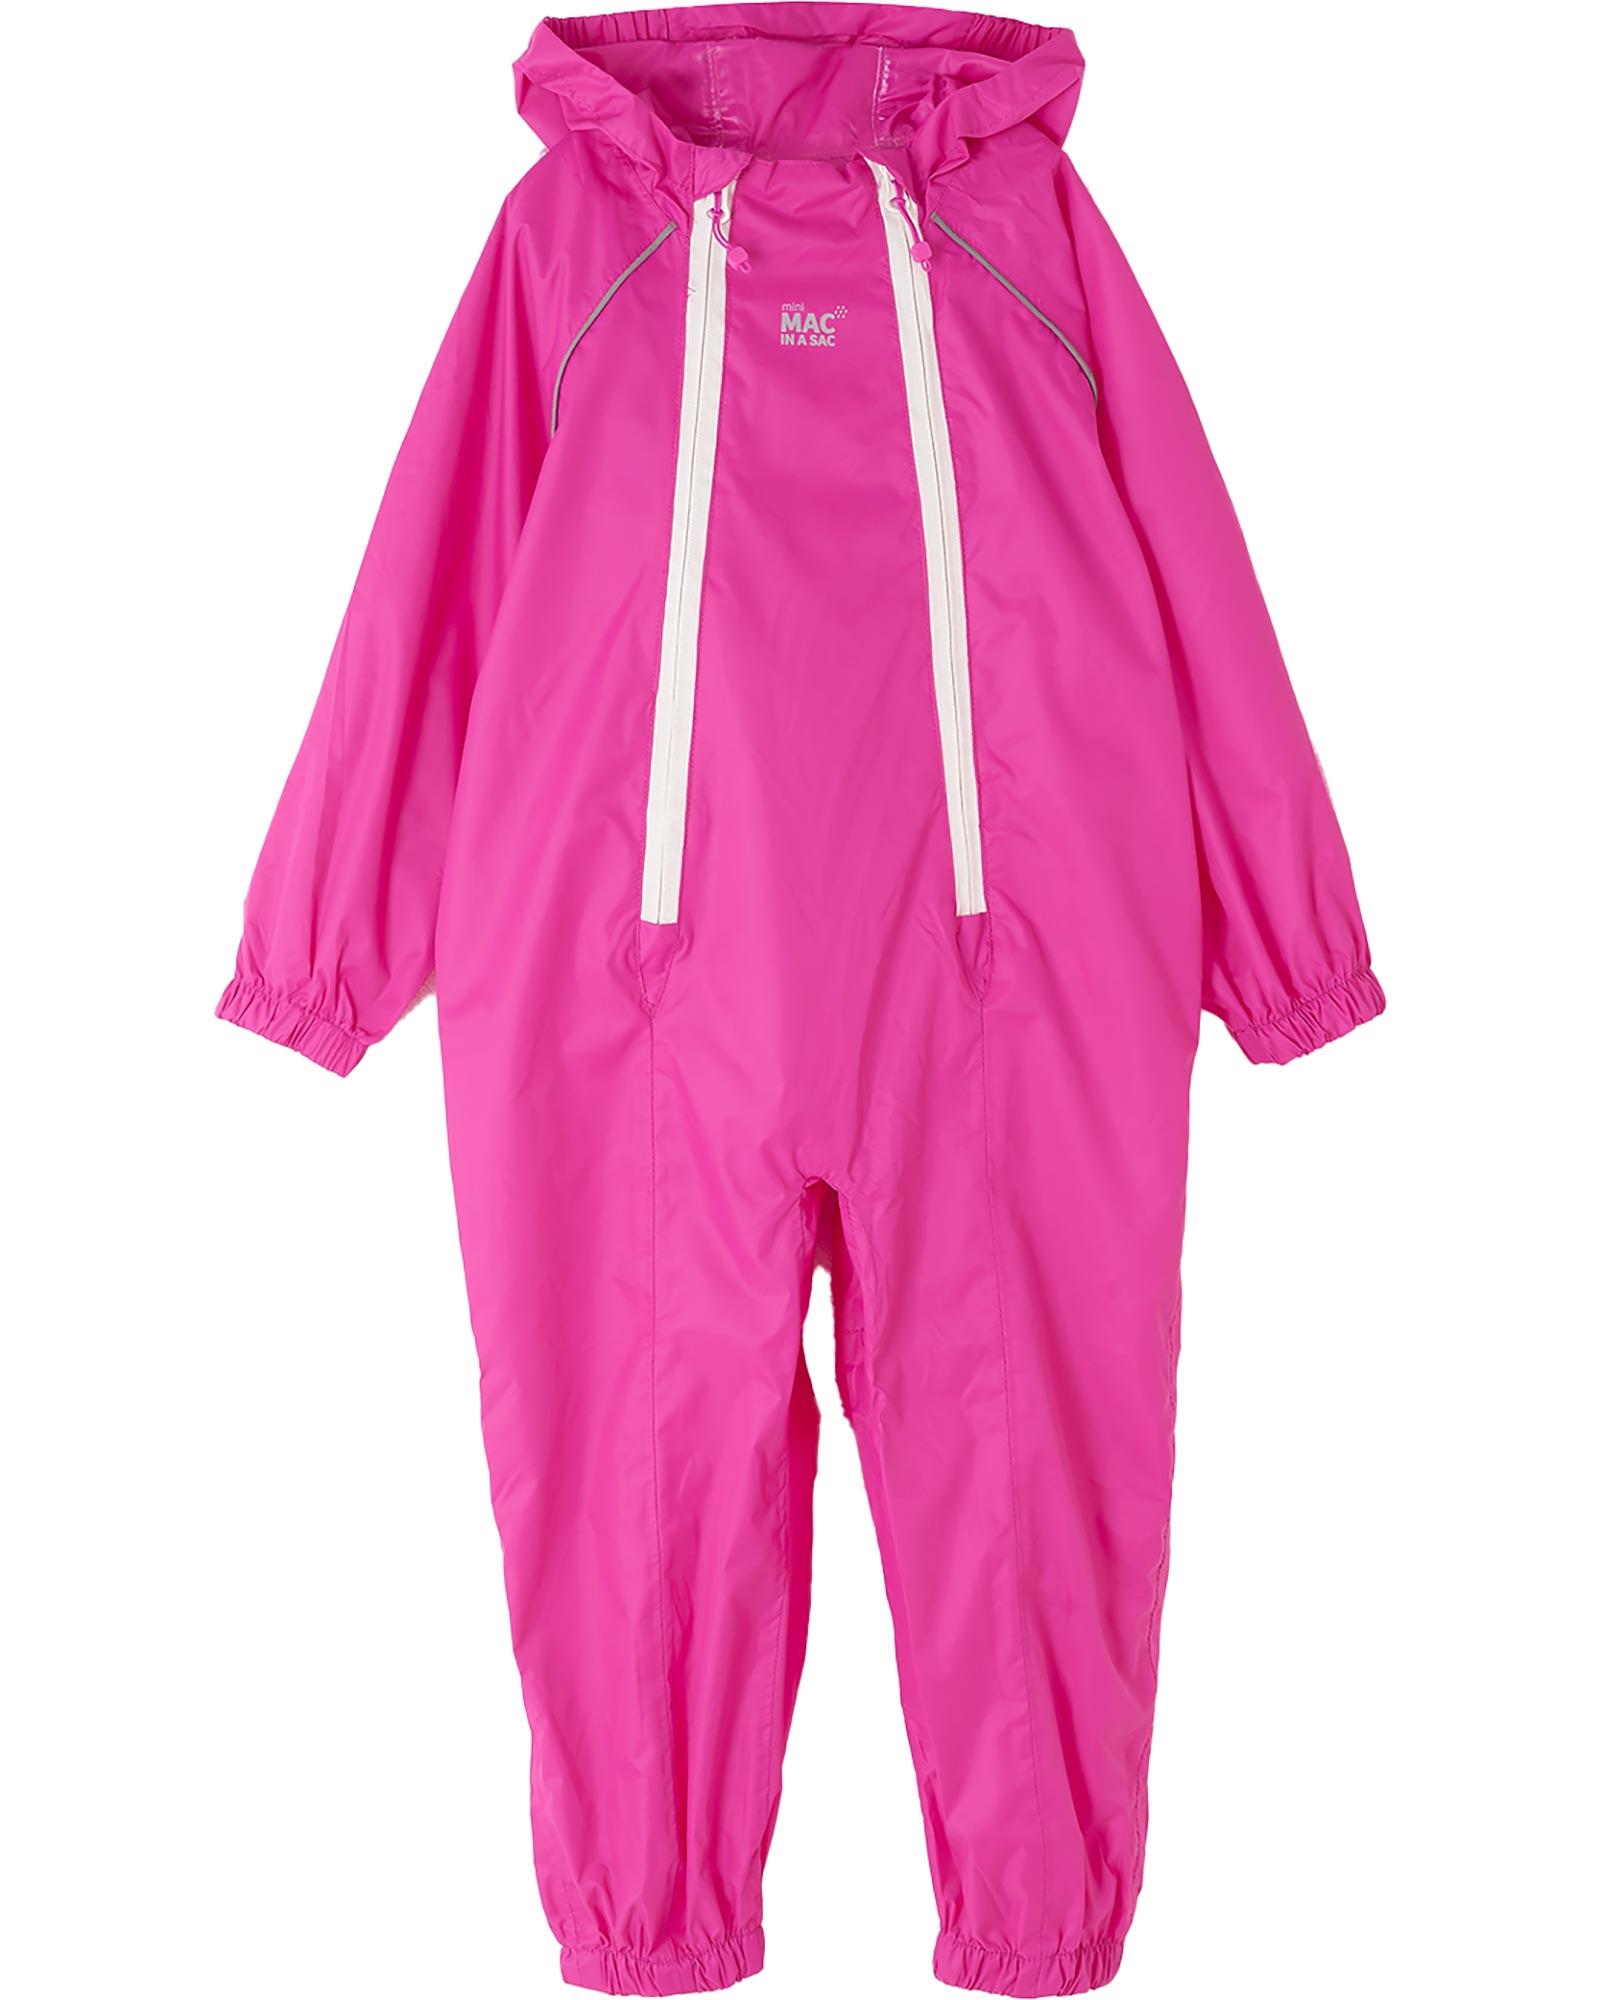 Target Dry Mac in a Sac Puddlesuit - Pink 4-5 Years